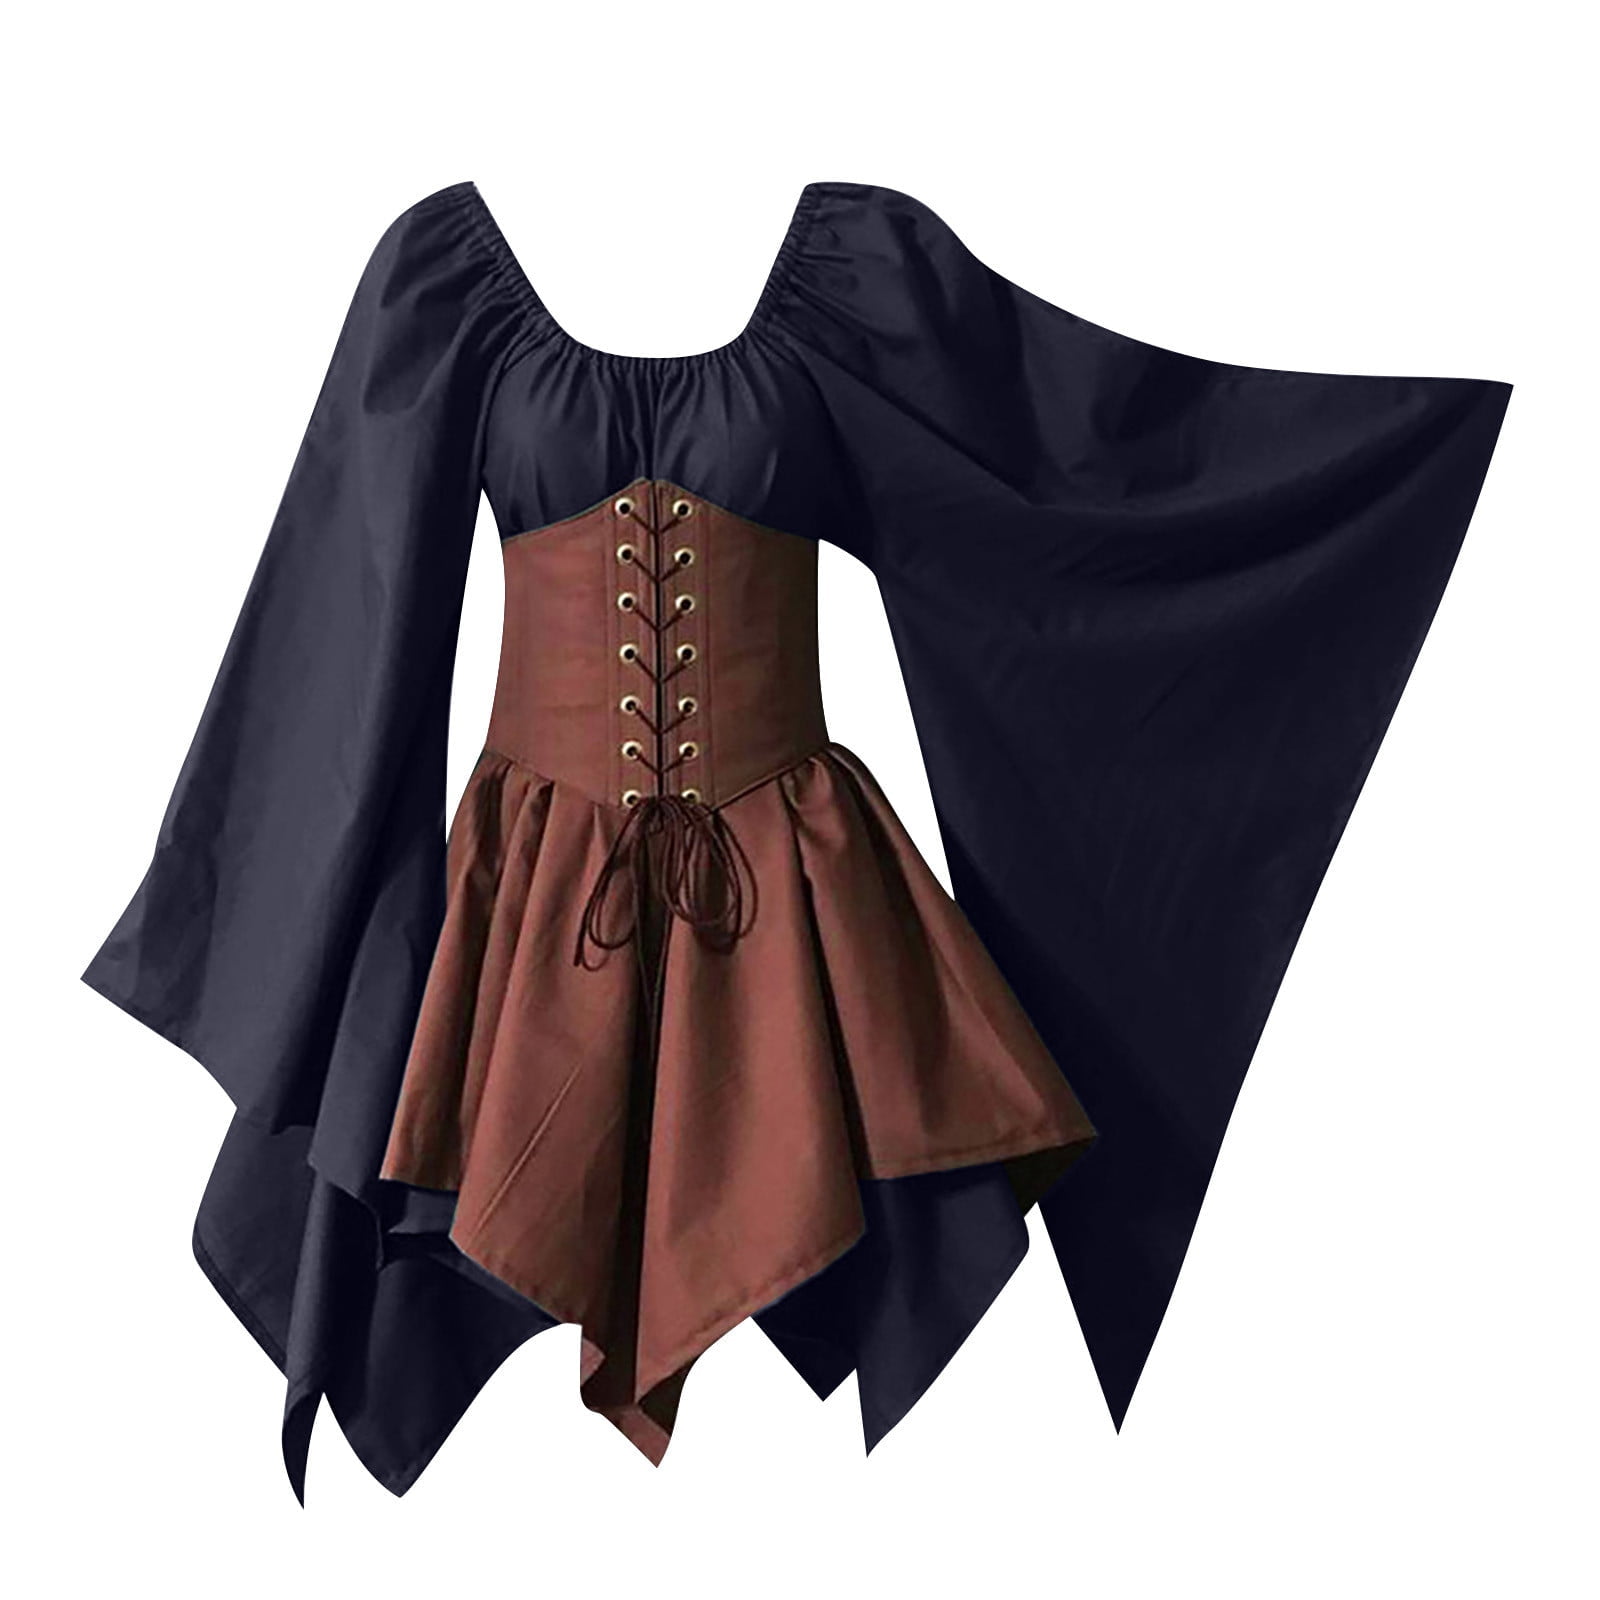 Fanxing ChristmasDeals Medieval Renaissance Dress Women with Corset Plus  Size Victorian Ball Gowns Costume Vintage Irish Long Over Dress Retro  Costumes Fall Dresses Clearance Sale Dark Blue,S 